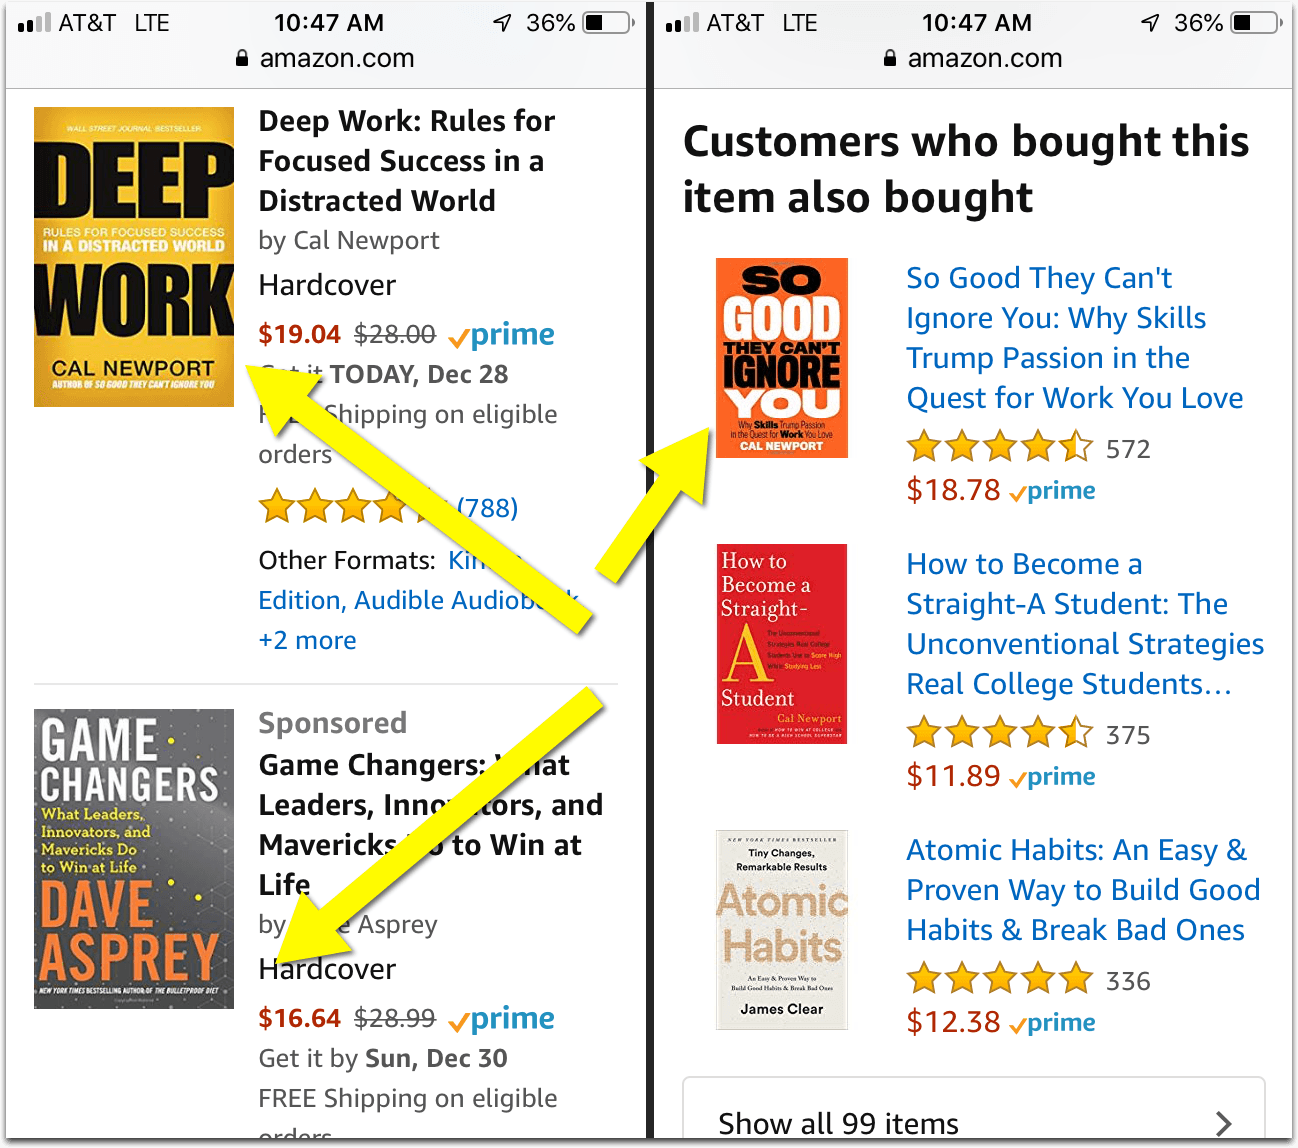 eBook cover thumbnails as shown on Amazon